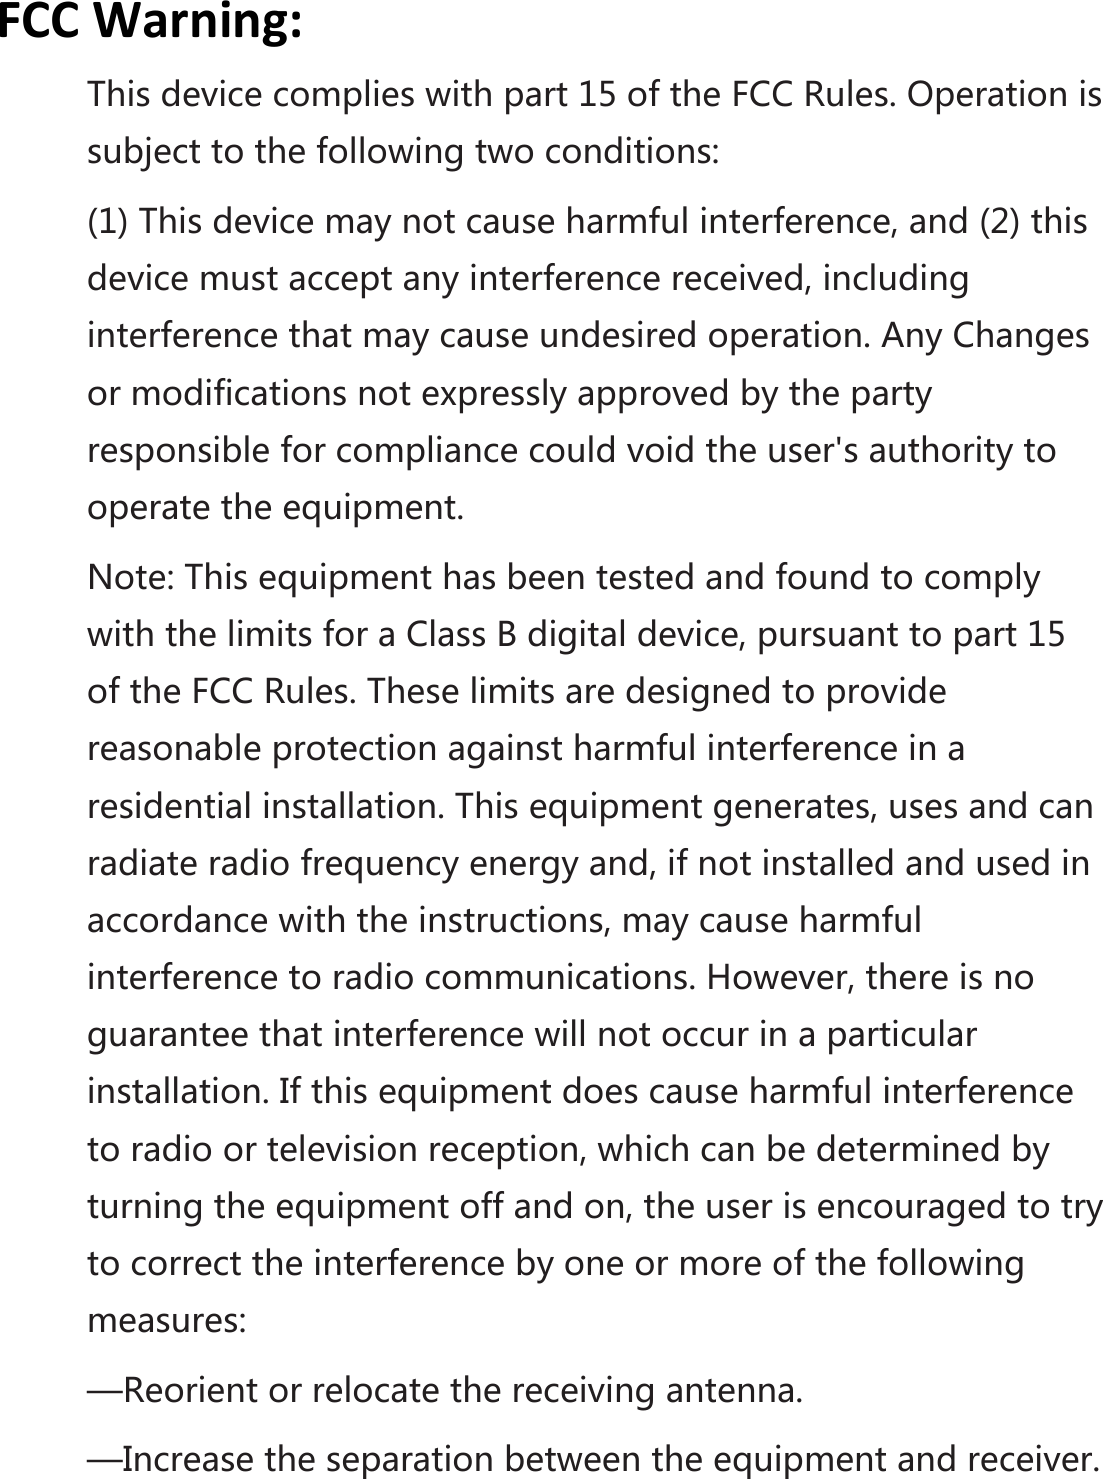 FCCWarning:Thisdevicecomplieswithpart15oftheFCCRules.Operationissubjecttothefollowingtwoconditions:(1)Thisdevicemaynotcauseharmfulinterference,and(2)thisdevicemustacceptanyinterferencereceived,includinginterferencethatmaycauseundesiredoperation.AnyChangesormodificationsnotexpresslyapprovedbythepartyresponsibleforcompliancecouldvoidtheuser&apos;sauthoritytooperatetheequipment.Note:ThisequipmenthasbeentestedandfoundtocomplywiththelimitsforaClassBdigitaldevice,pursuanttopart15oftheFCCRules.Theselimitsaredesignedtoprovidereasonableprotectionagainstharmfulinterferenceinaresidentialinstallation.Thisequipmentgenerates,usesandcanradiateradiofrequencyenergyand,ifnotinstalledandusedinaccordancewiththeinstructions,maycauseharmfulinterferencetoradiocommunications.However,thereisnoguaranteethatinterferencewillnotoccurinaparticularinstallation.Ifthisequipmentdoescauseharmfulinterferencetoradioortelevisionreception,whichcanbedeterminedbyturningtheequipmentoffandon,theuserisencouragedtotrytocorrecttheinterferencebyoneormoreofthefollowingmeasures:—Reorientorrelocatethereceivingantenna.—Increasetheseparationbetweentheequipmentandreceiver.